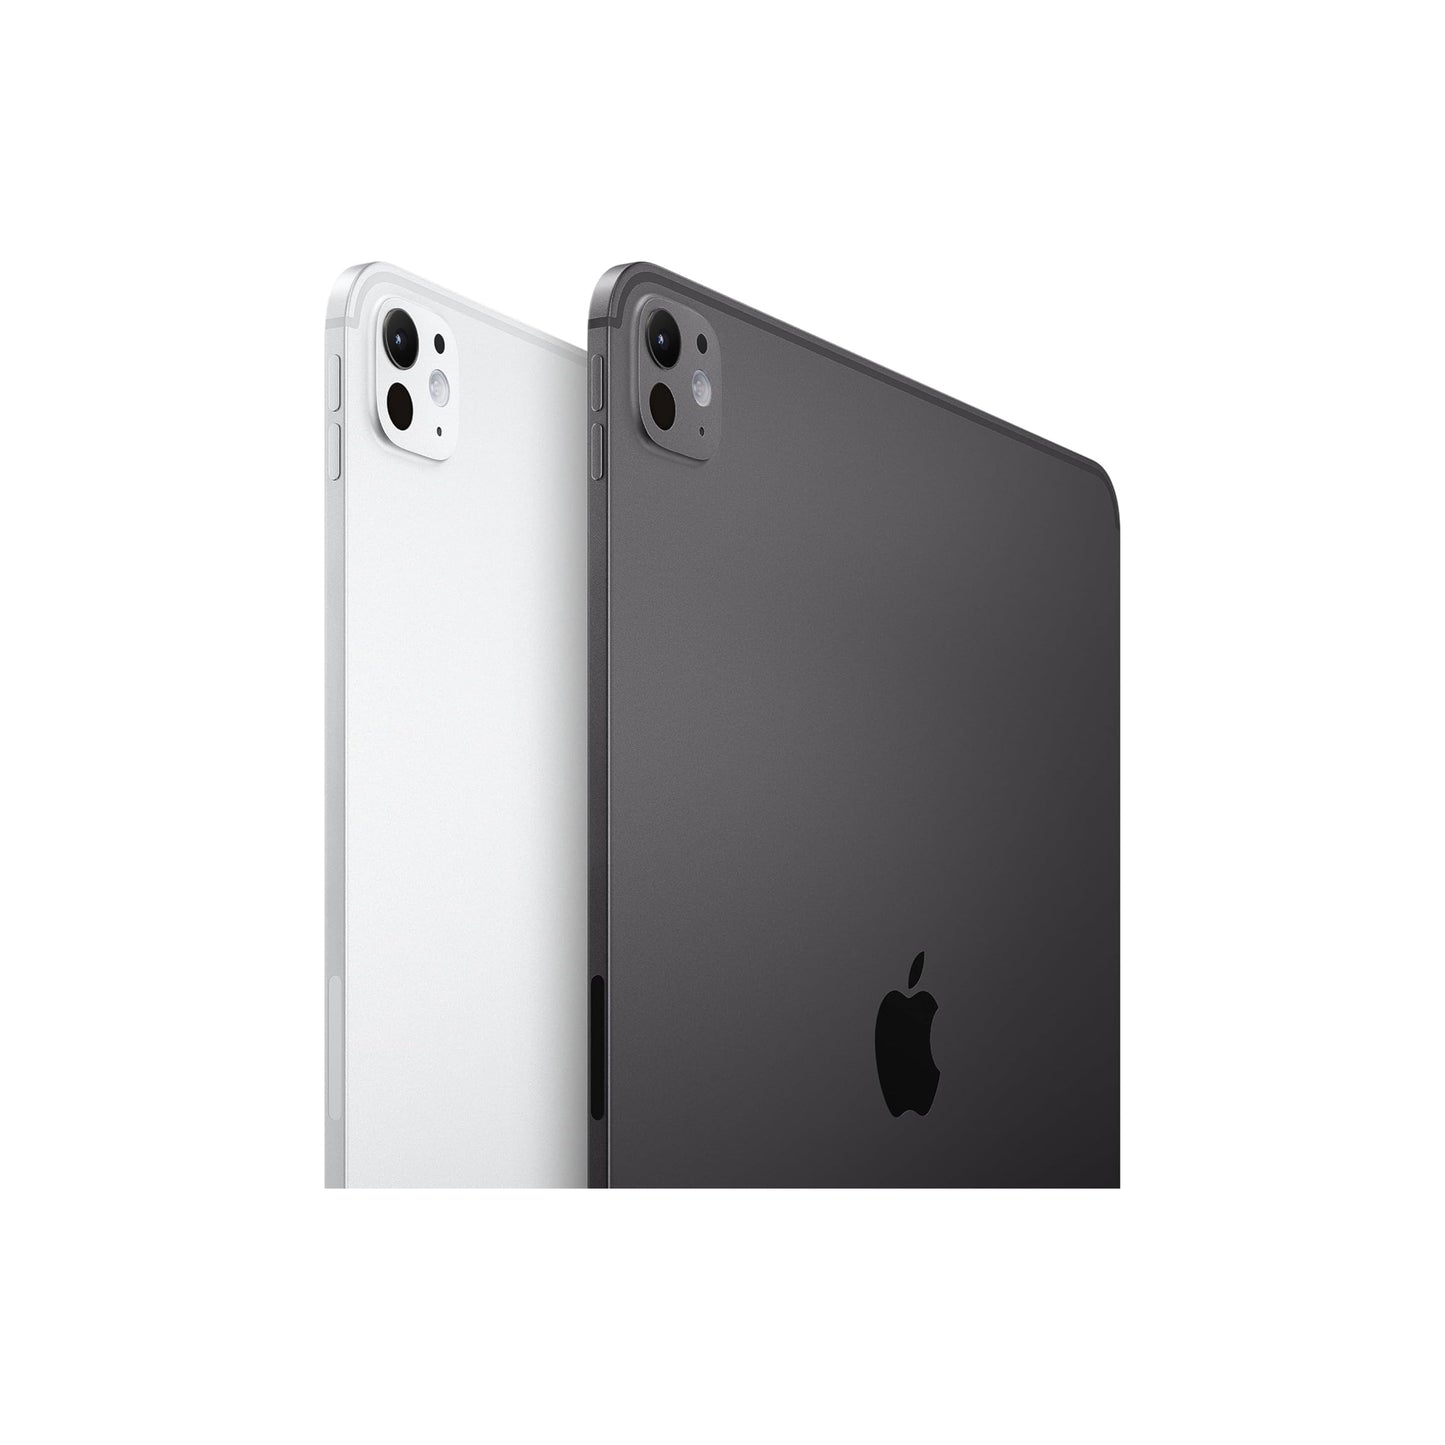 Apple iPad Pro 11-Inch (M4): Ultra Retina XDR Display - Nano-Texture Glass, 2TB, Landscape 12MP Front Camera/12MP Back Camera, LiDAR Scanner, Wi-Fi 6E + 5G Cellular with eSIM, Face ID — Space Black